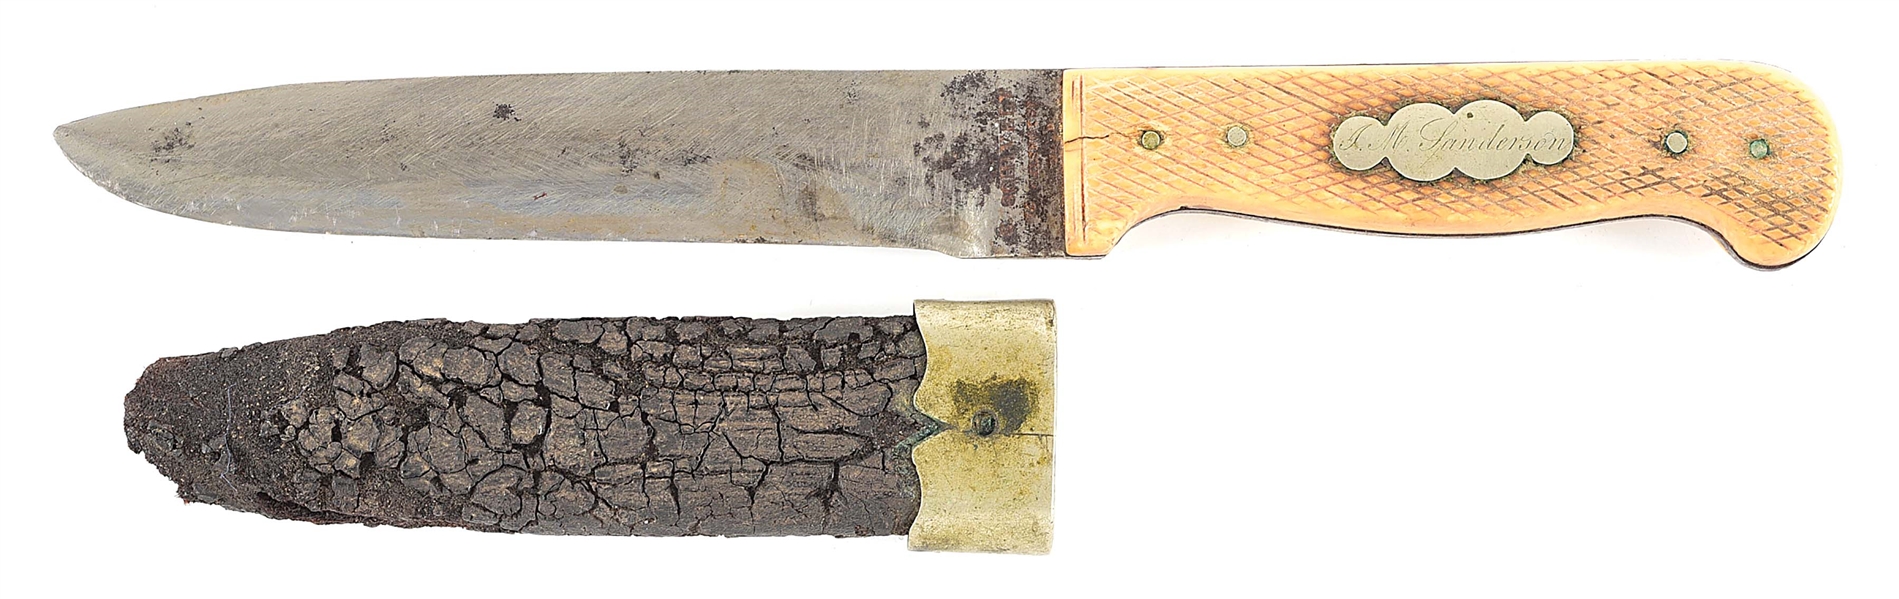 SCHIVELY PHILADELPHIA BOWIE KNIFE WITH SCABBARD INSCRIBED TO CIVIL WAR COL. J. M. SANDERSON.